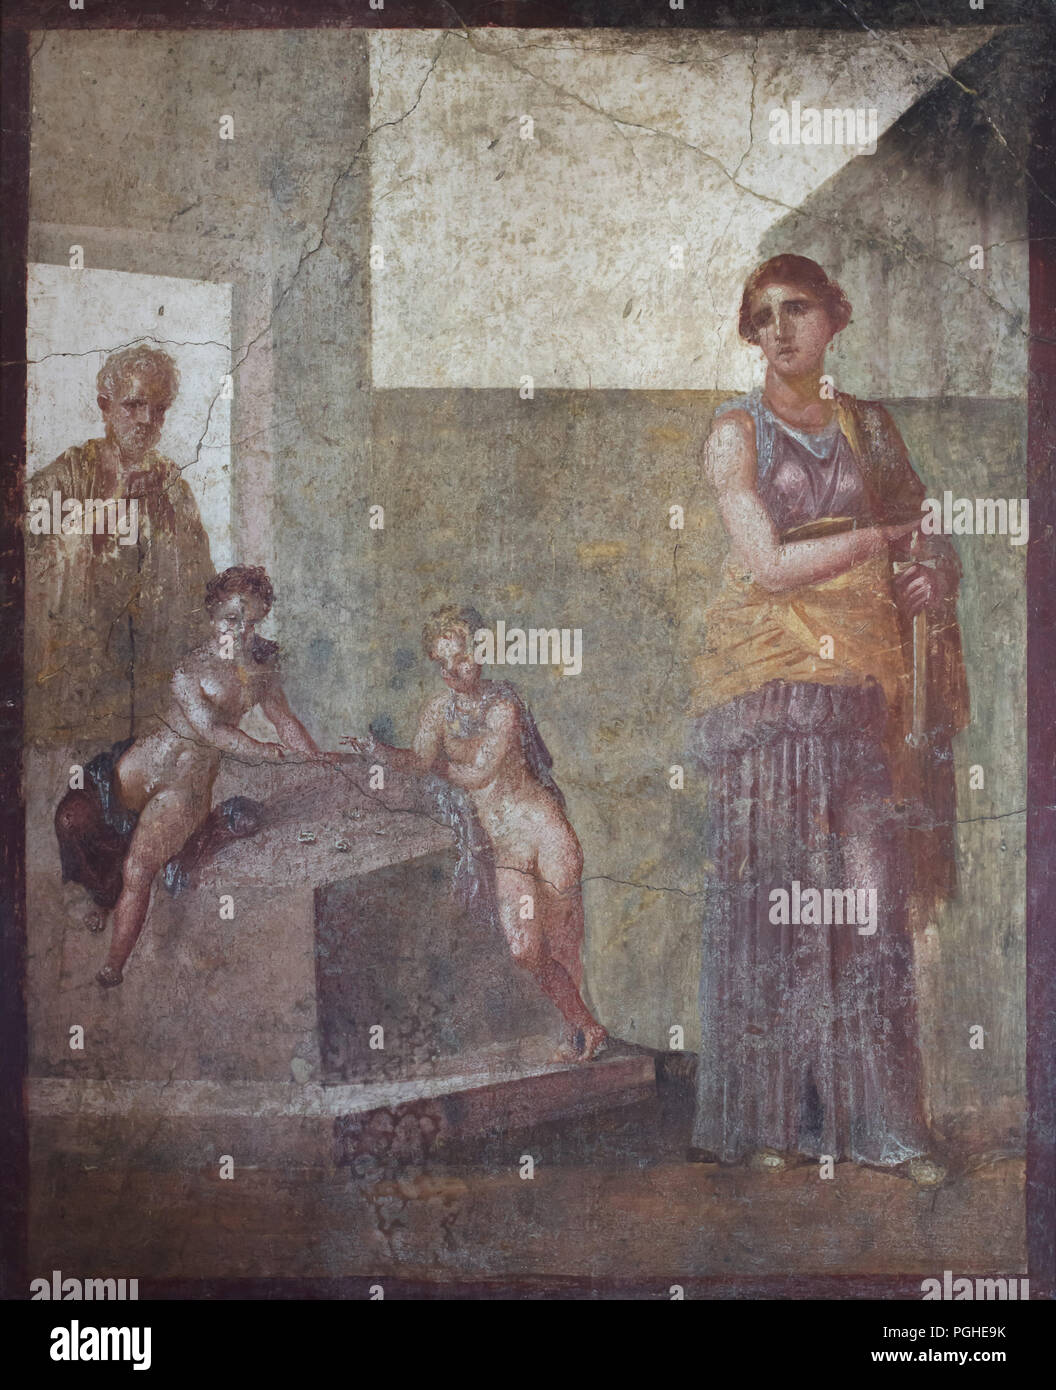 Medea planning the murder of her children depicted in the Roman fresco from the House of the Dioscuri (Casa dei Dioscuri) in Pompeii (62-79 AD), now on display in the National Archaeological Museum (Museo Archeologico Nazionale di Napoli) in Naples, Campania, Italy. In their ignorance they play knucklebones, while an elderly teacher helps them. The fresco is thought to derive from a work by Timomachos of Byzantium, who was active around the middle of the 1st century BC. Stock Photo